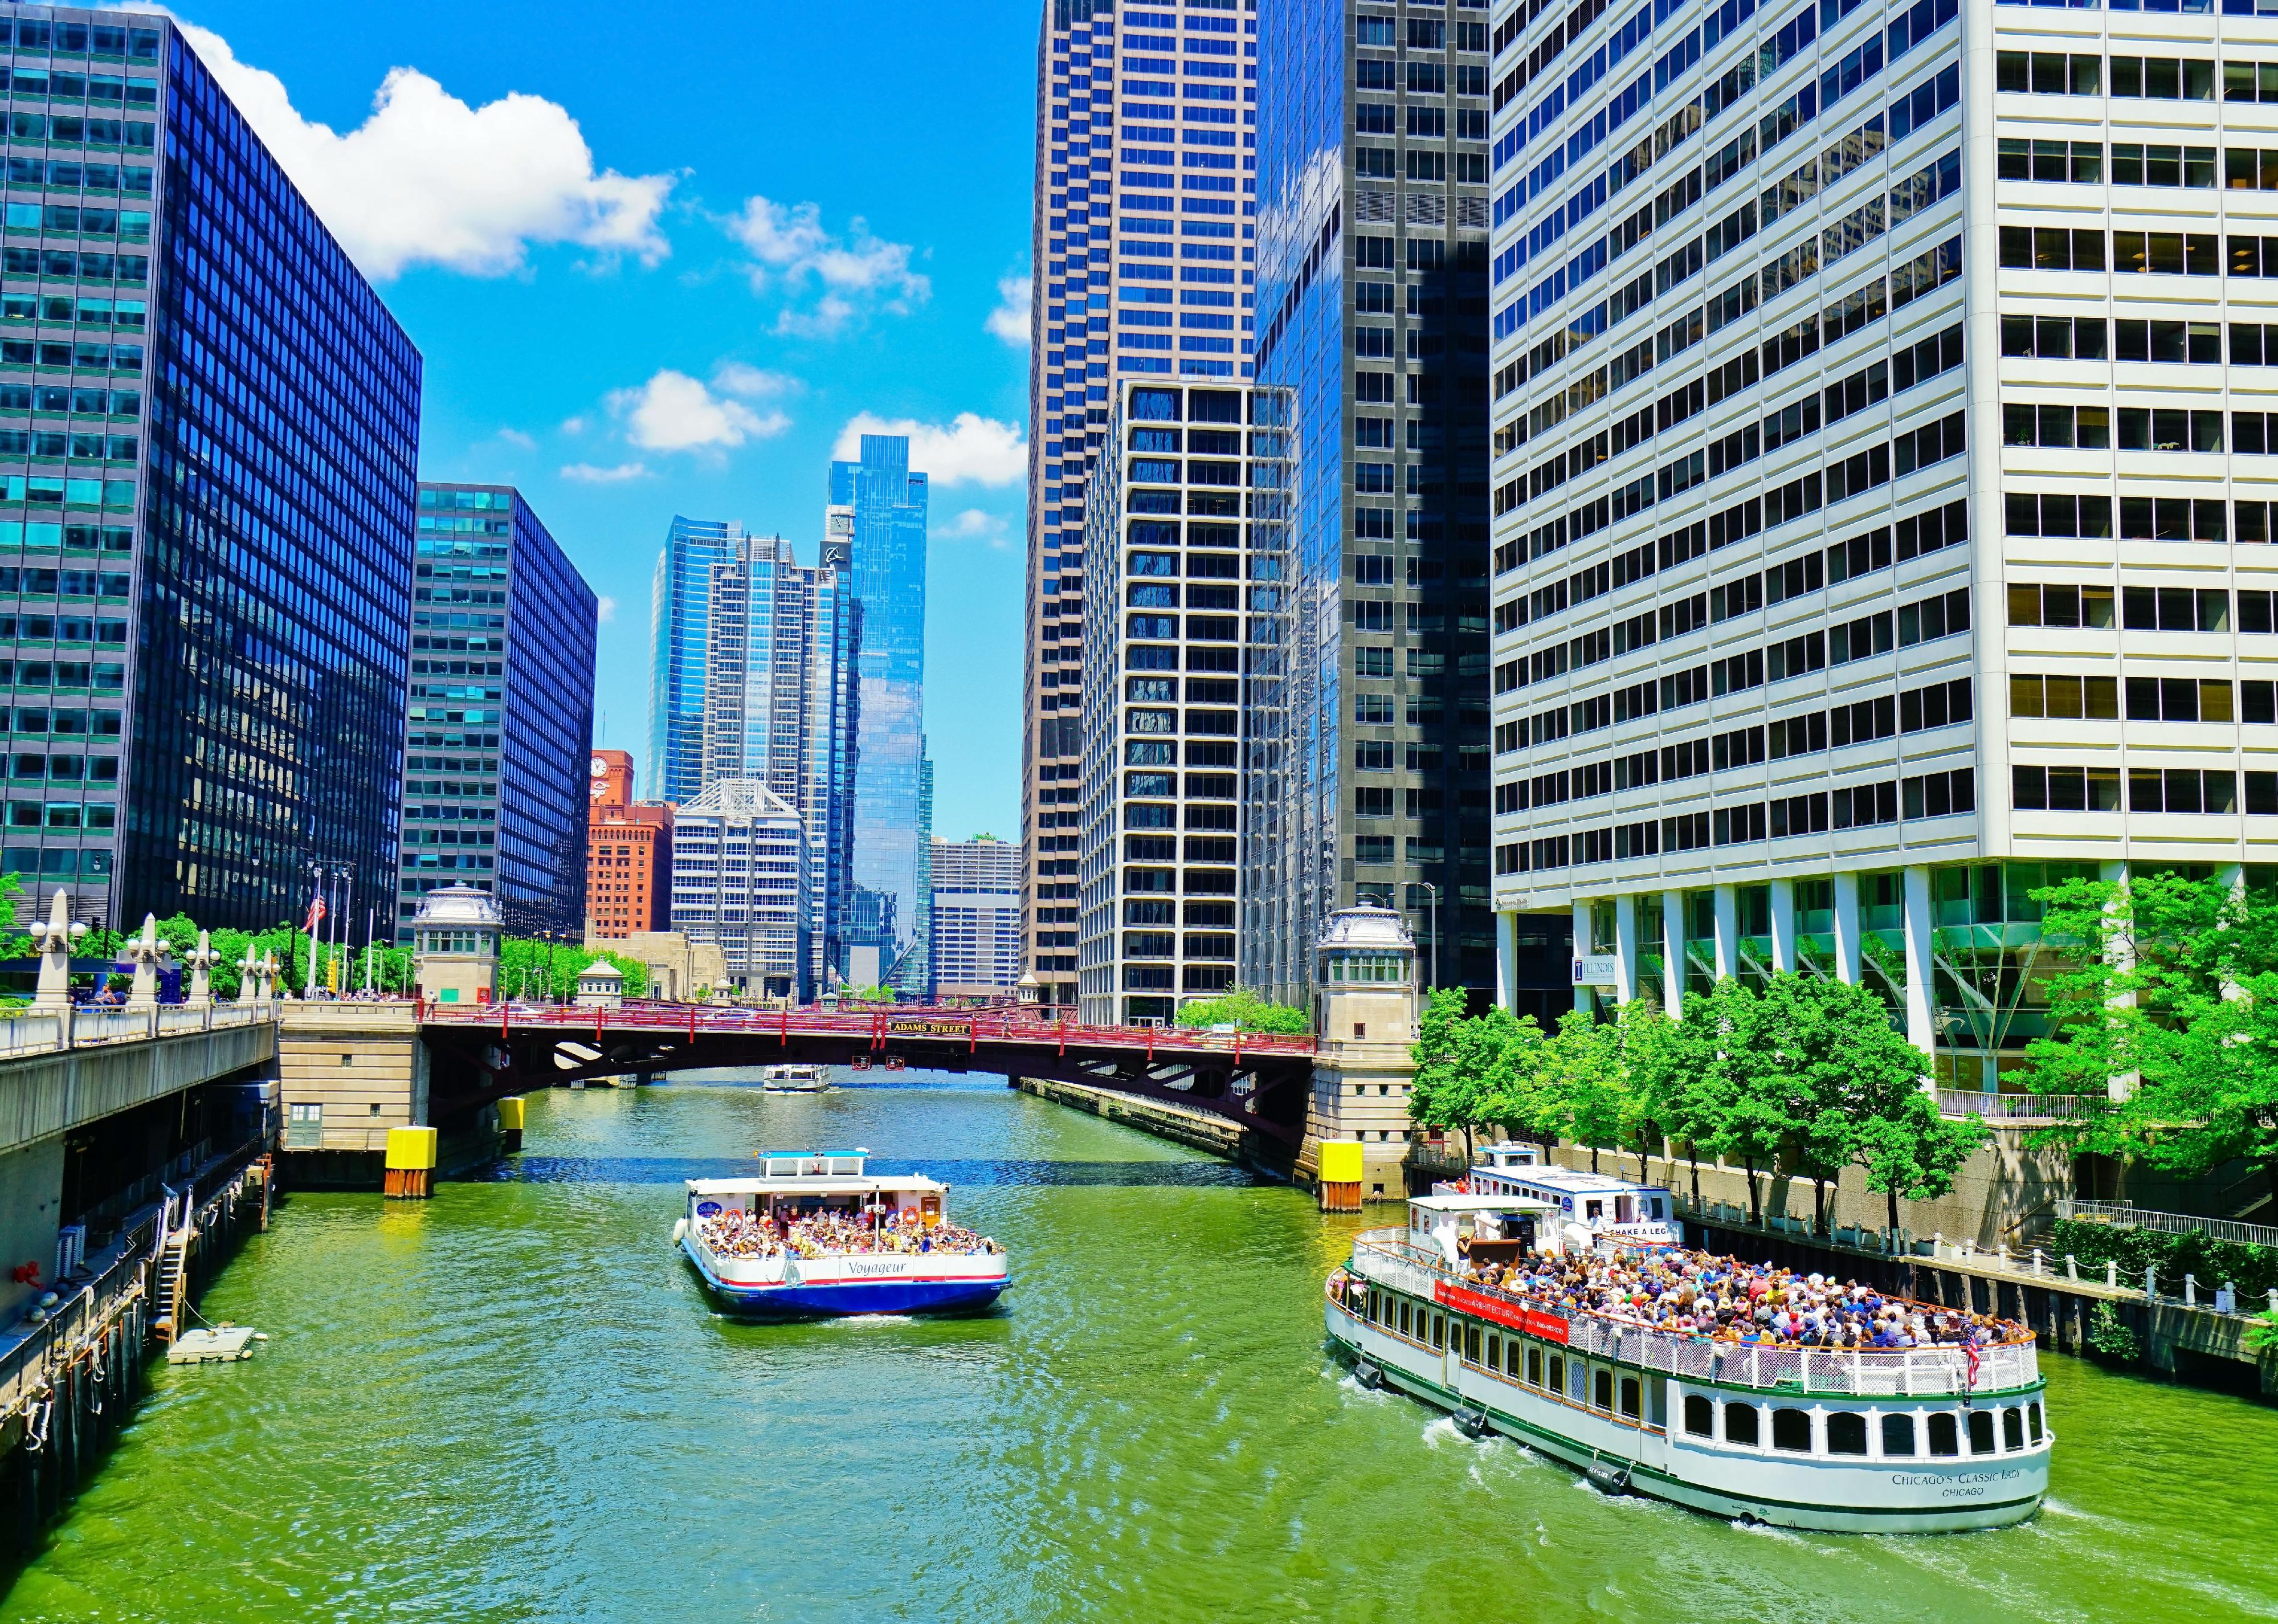 Two boats filled with people enjoy a day on the Chicago River.